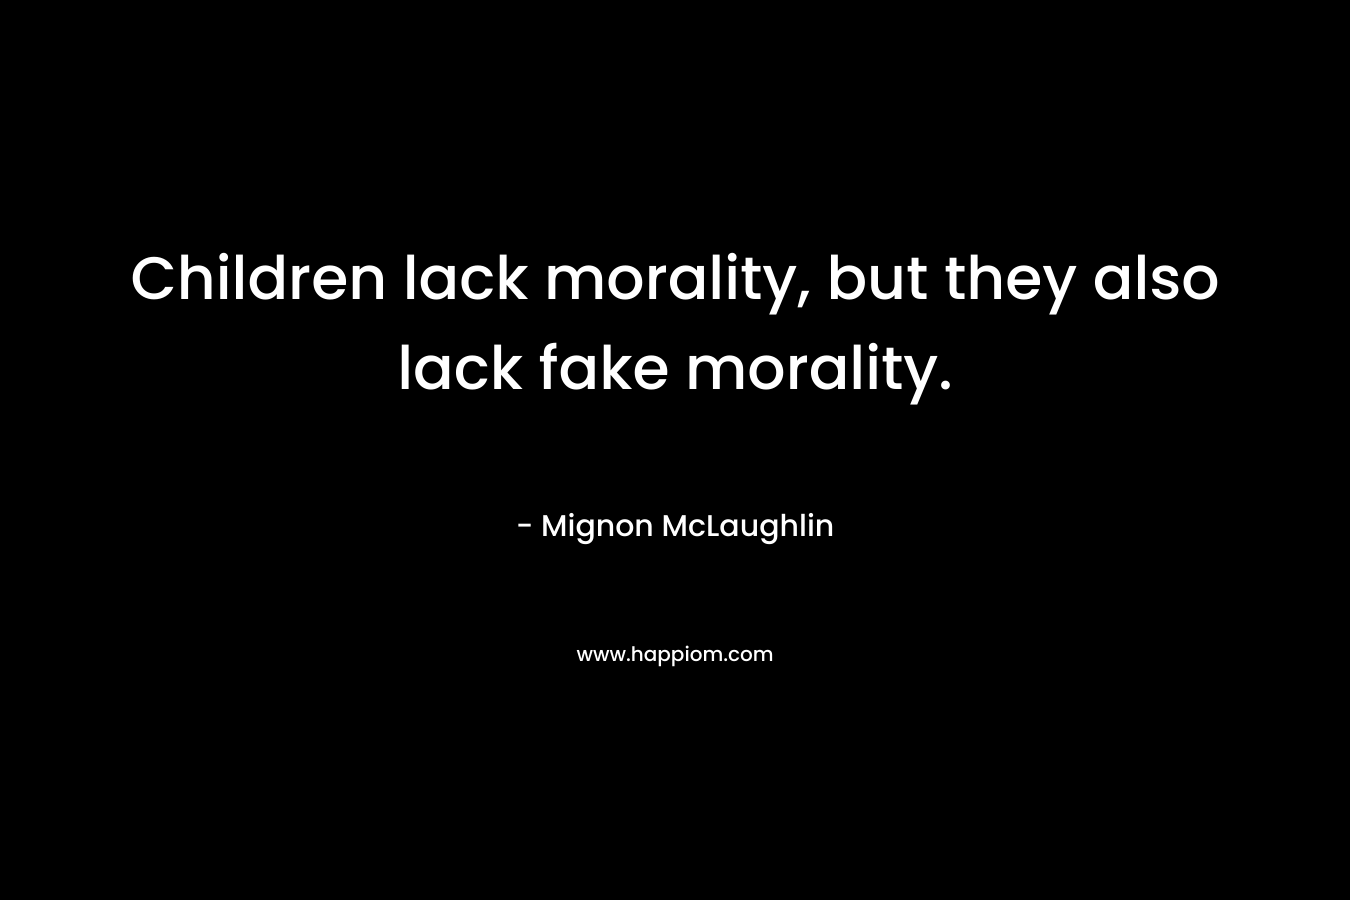 Children lack morality, but they also lack fake morality.